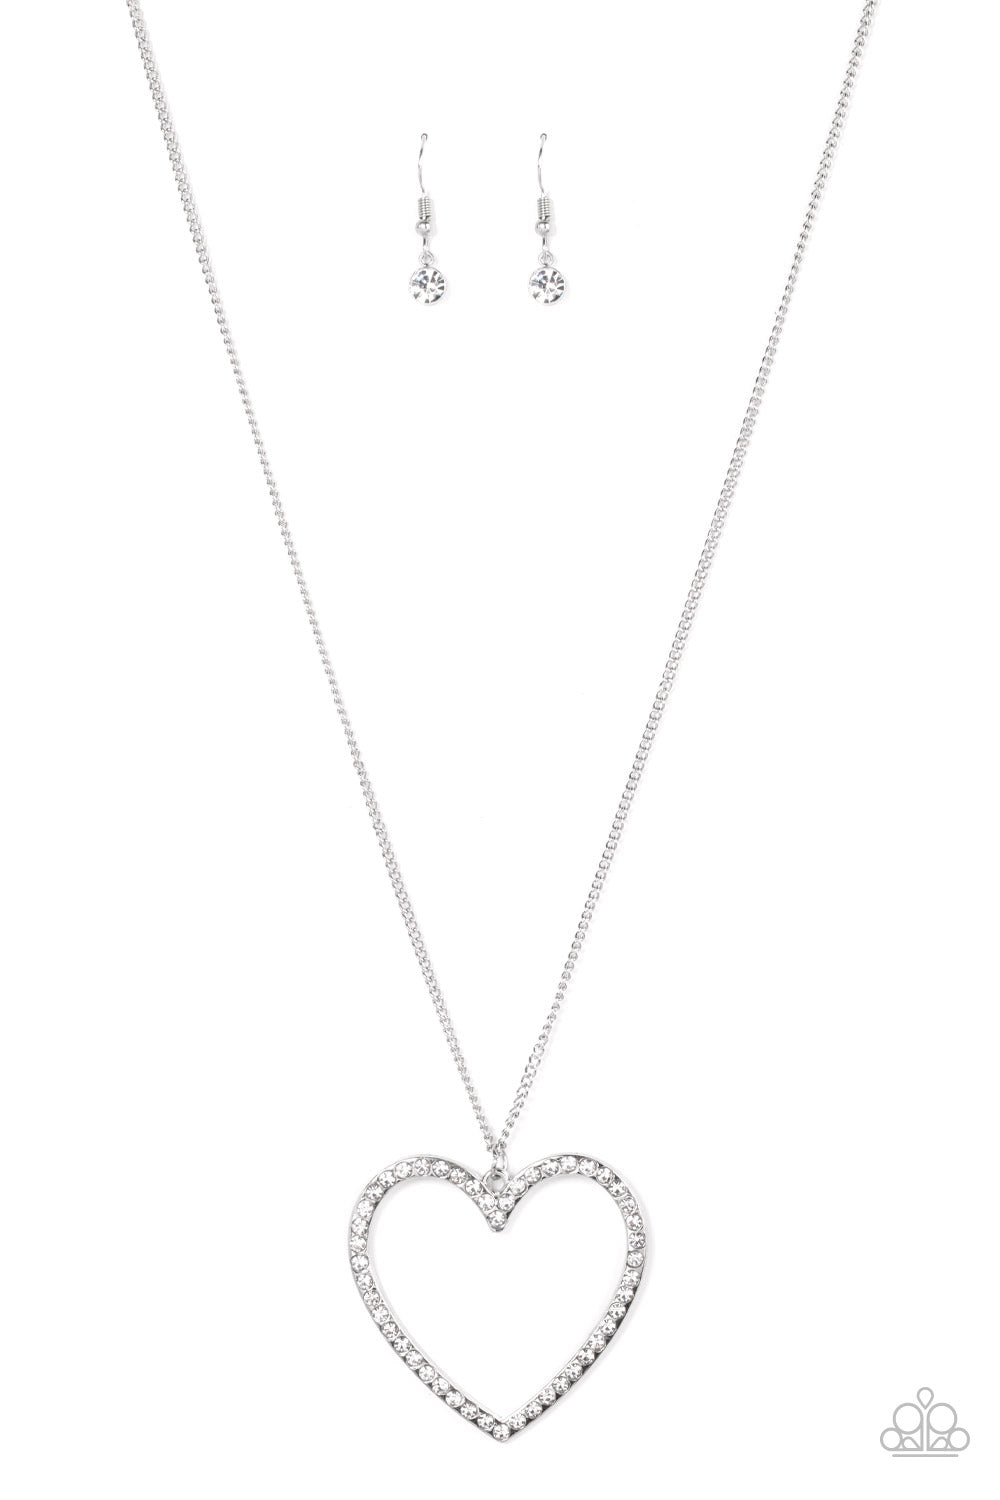 Dotted in dainty white rhinestones, an oversized silver heart frame swings from the bottom of an extended silver chain for a flirtatious sparkle. Features an adjustable clasp closure.